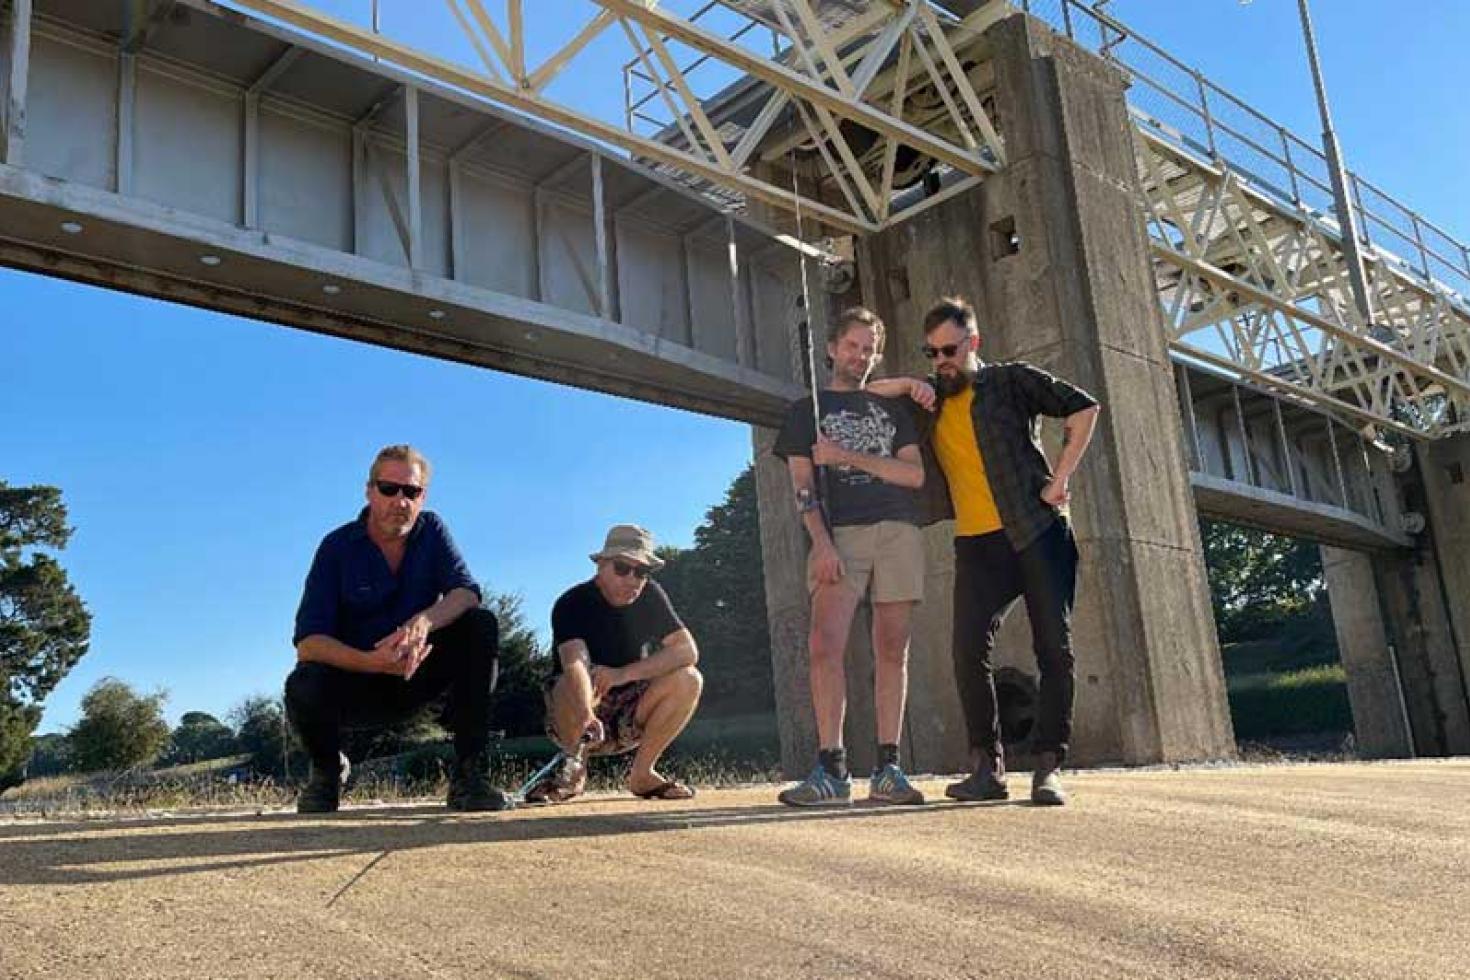 Australia's Power Supply shares new single 'Let's Do This and Let's Do That'